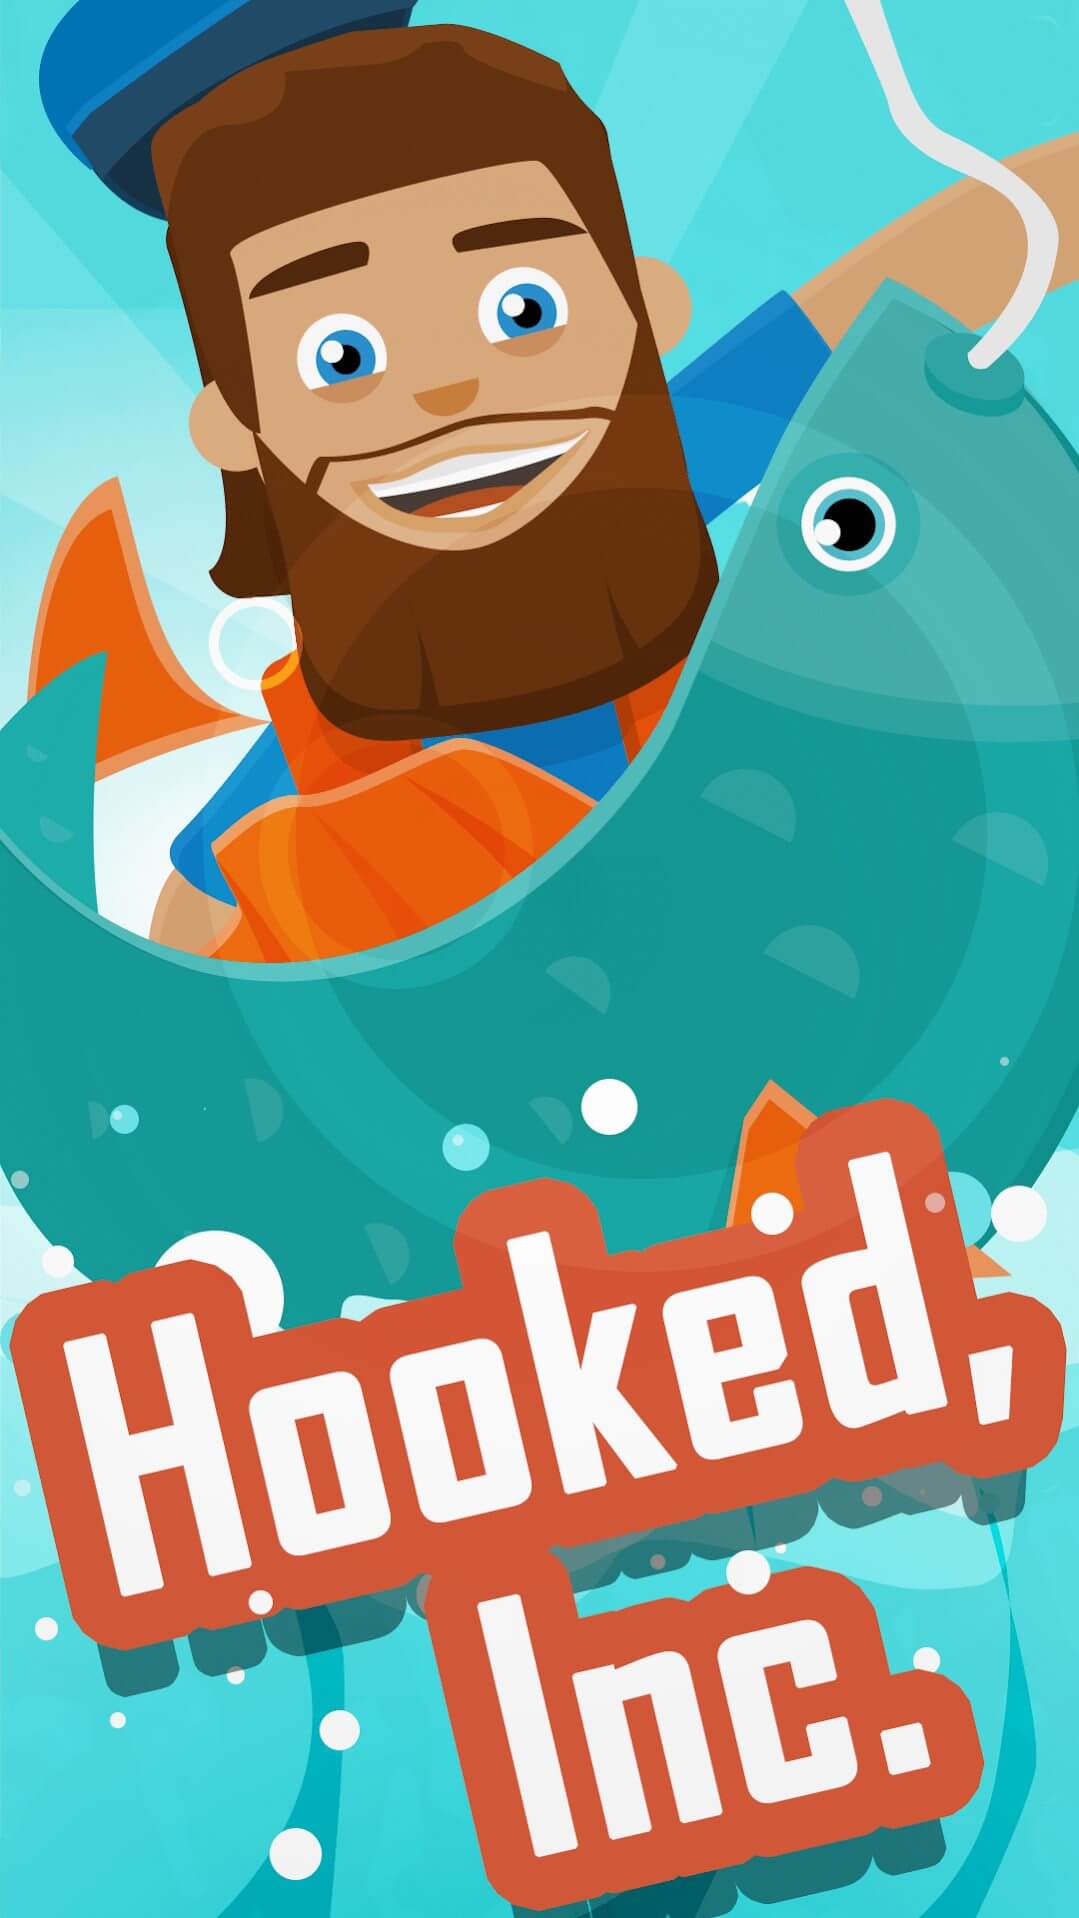 Hooked Inc: Fisher Tycoon gameplay first